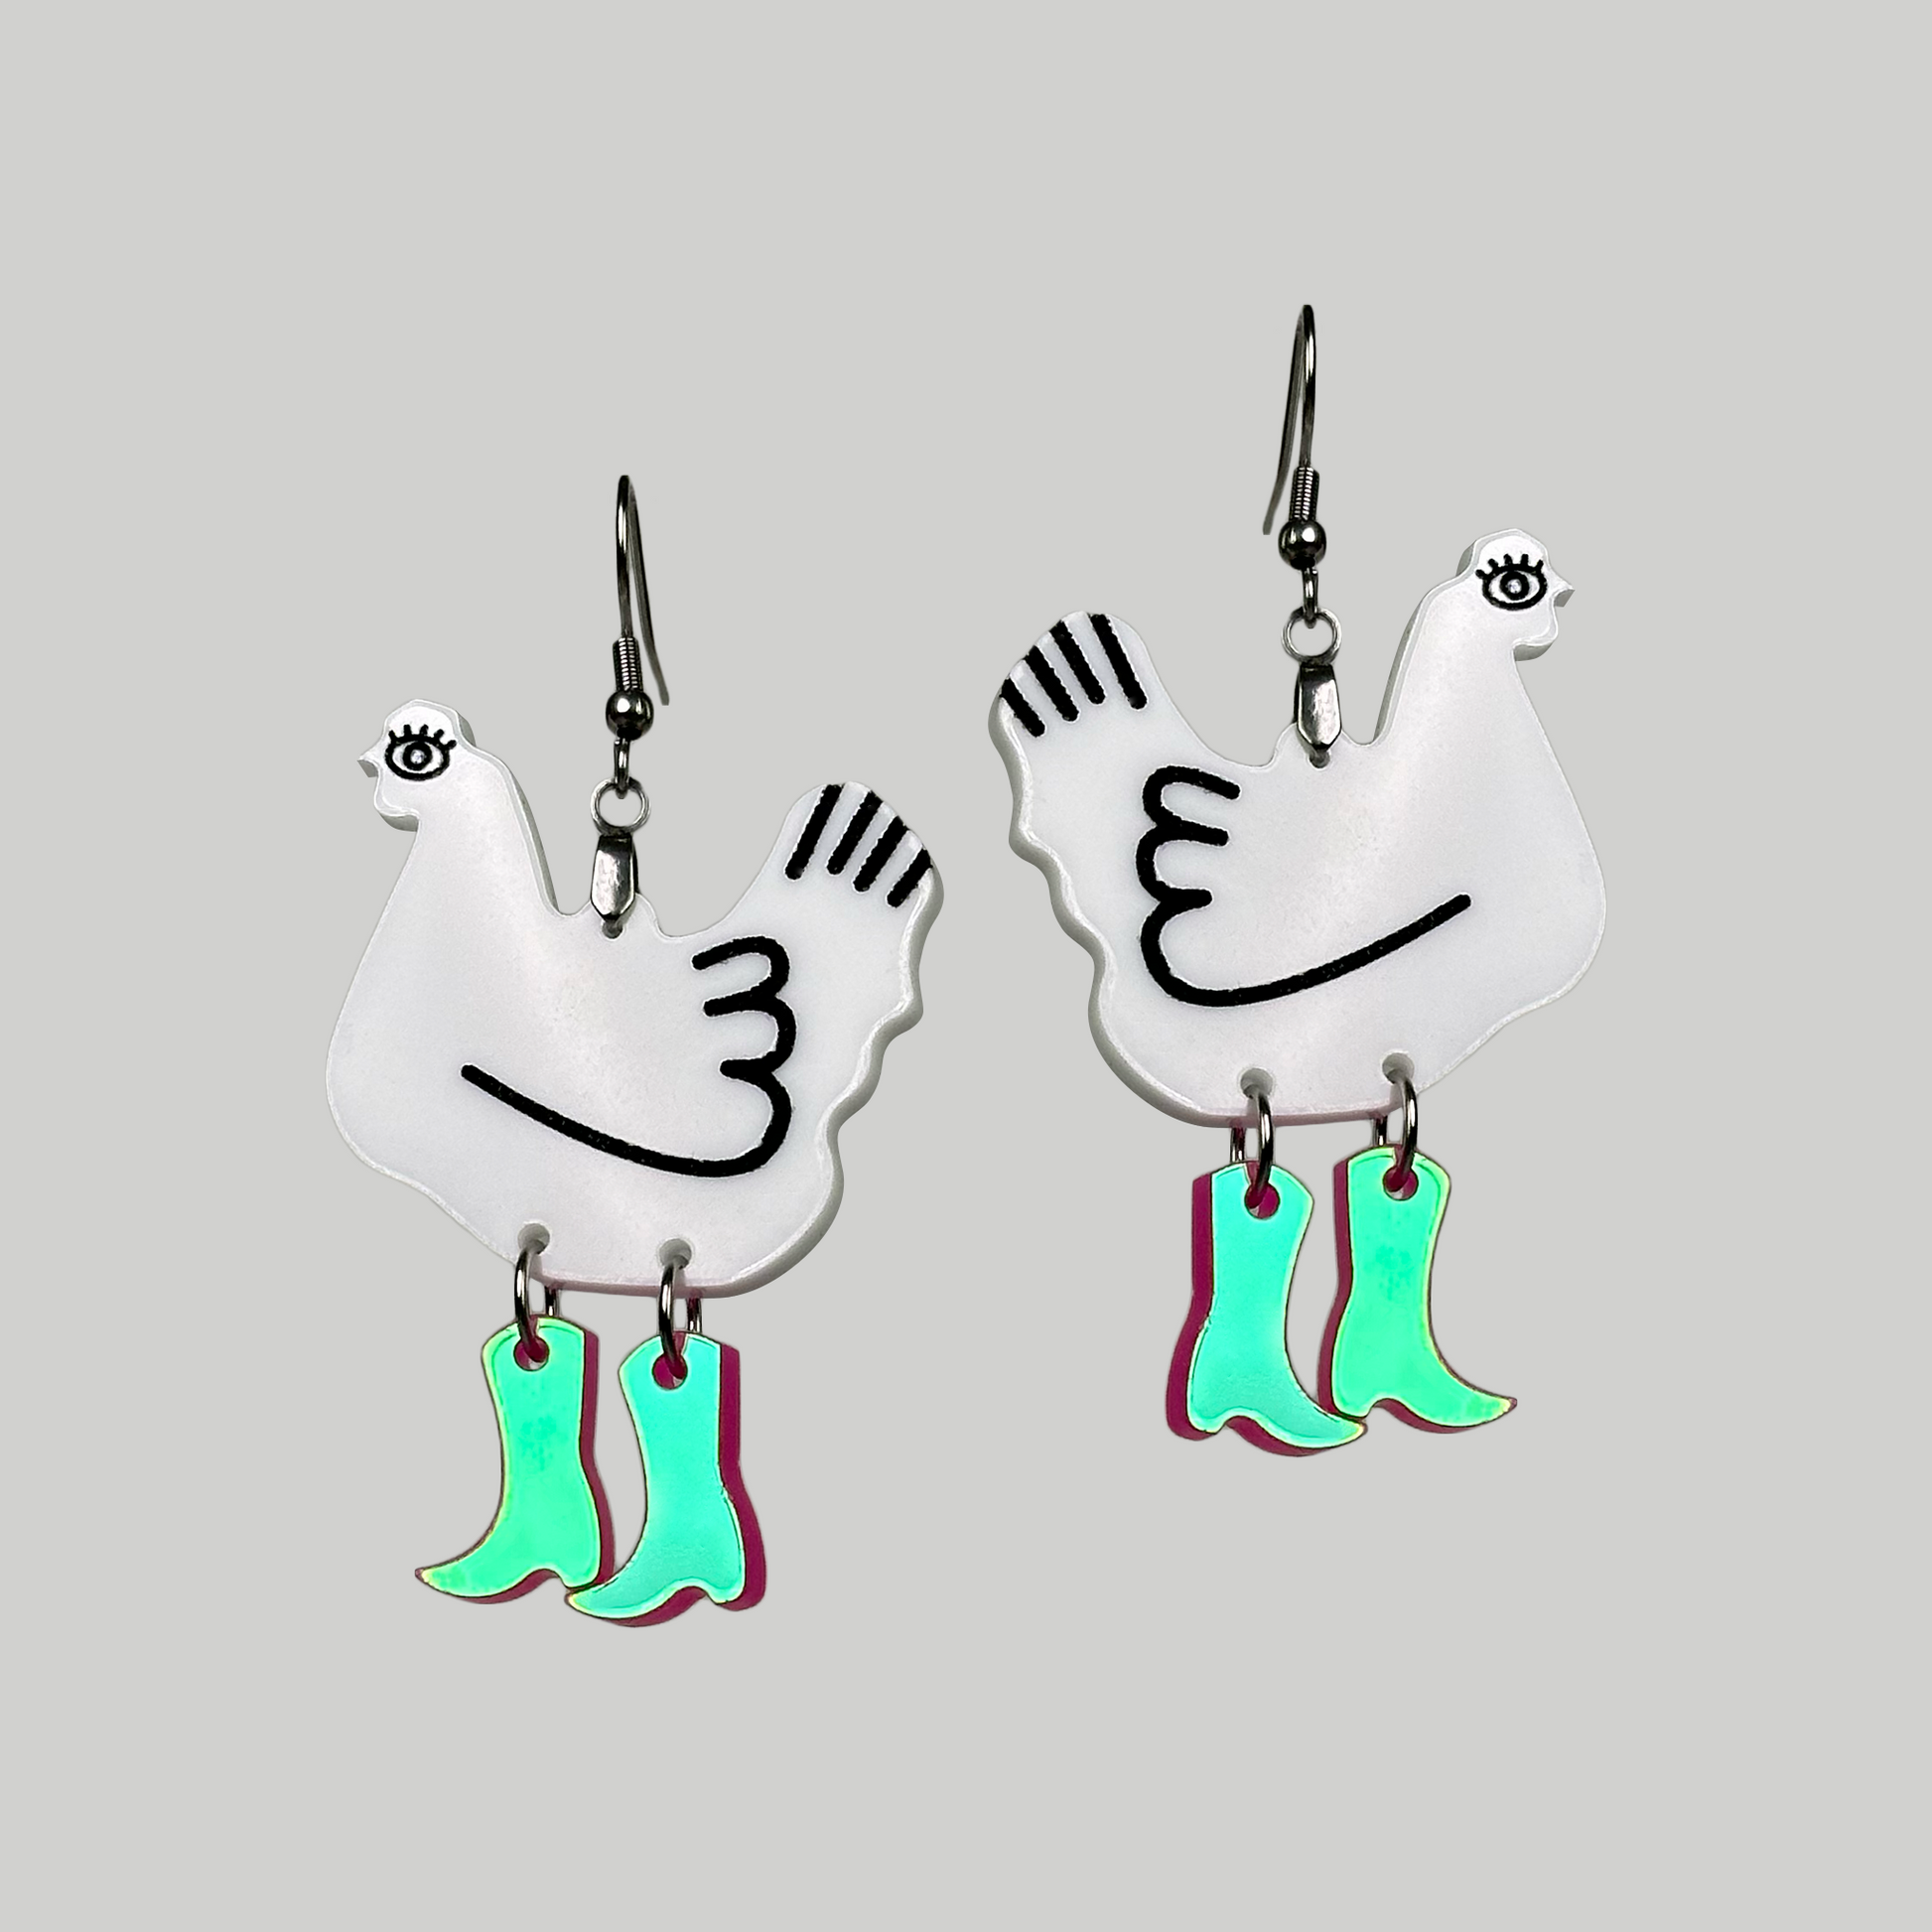 Chicken Boots Earrings: Playful and whimsical, these earrings feature miniature chicken boot designs that is fresh and exciting.